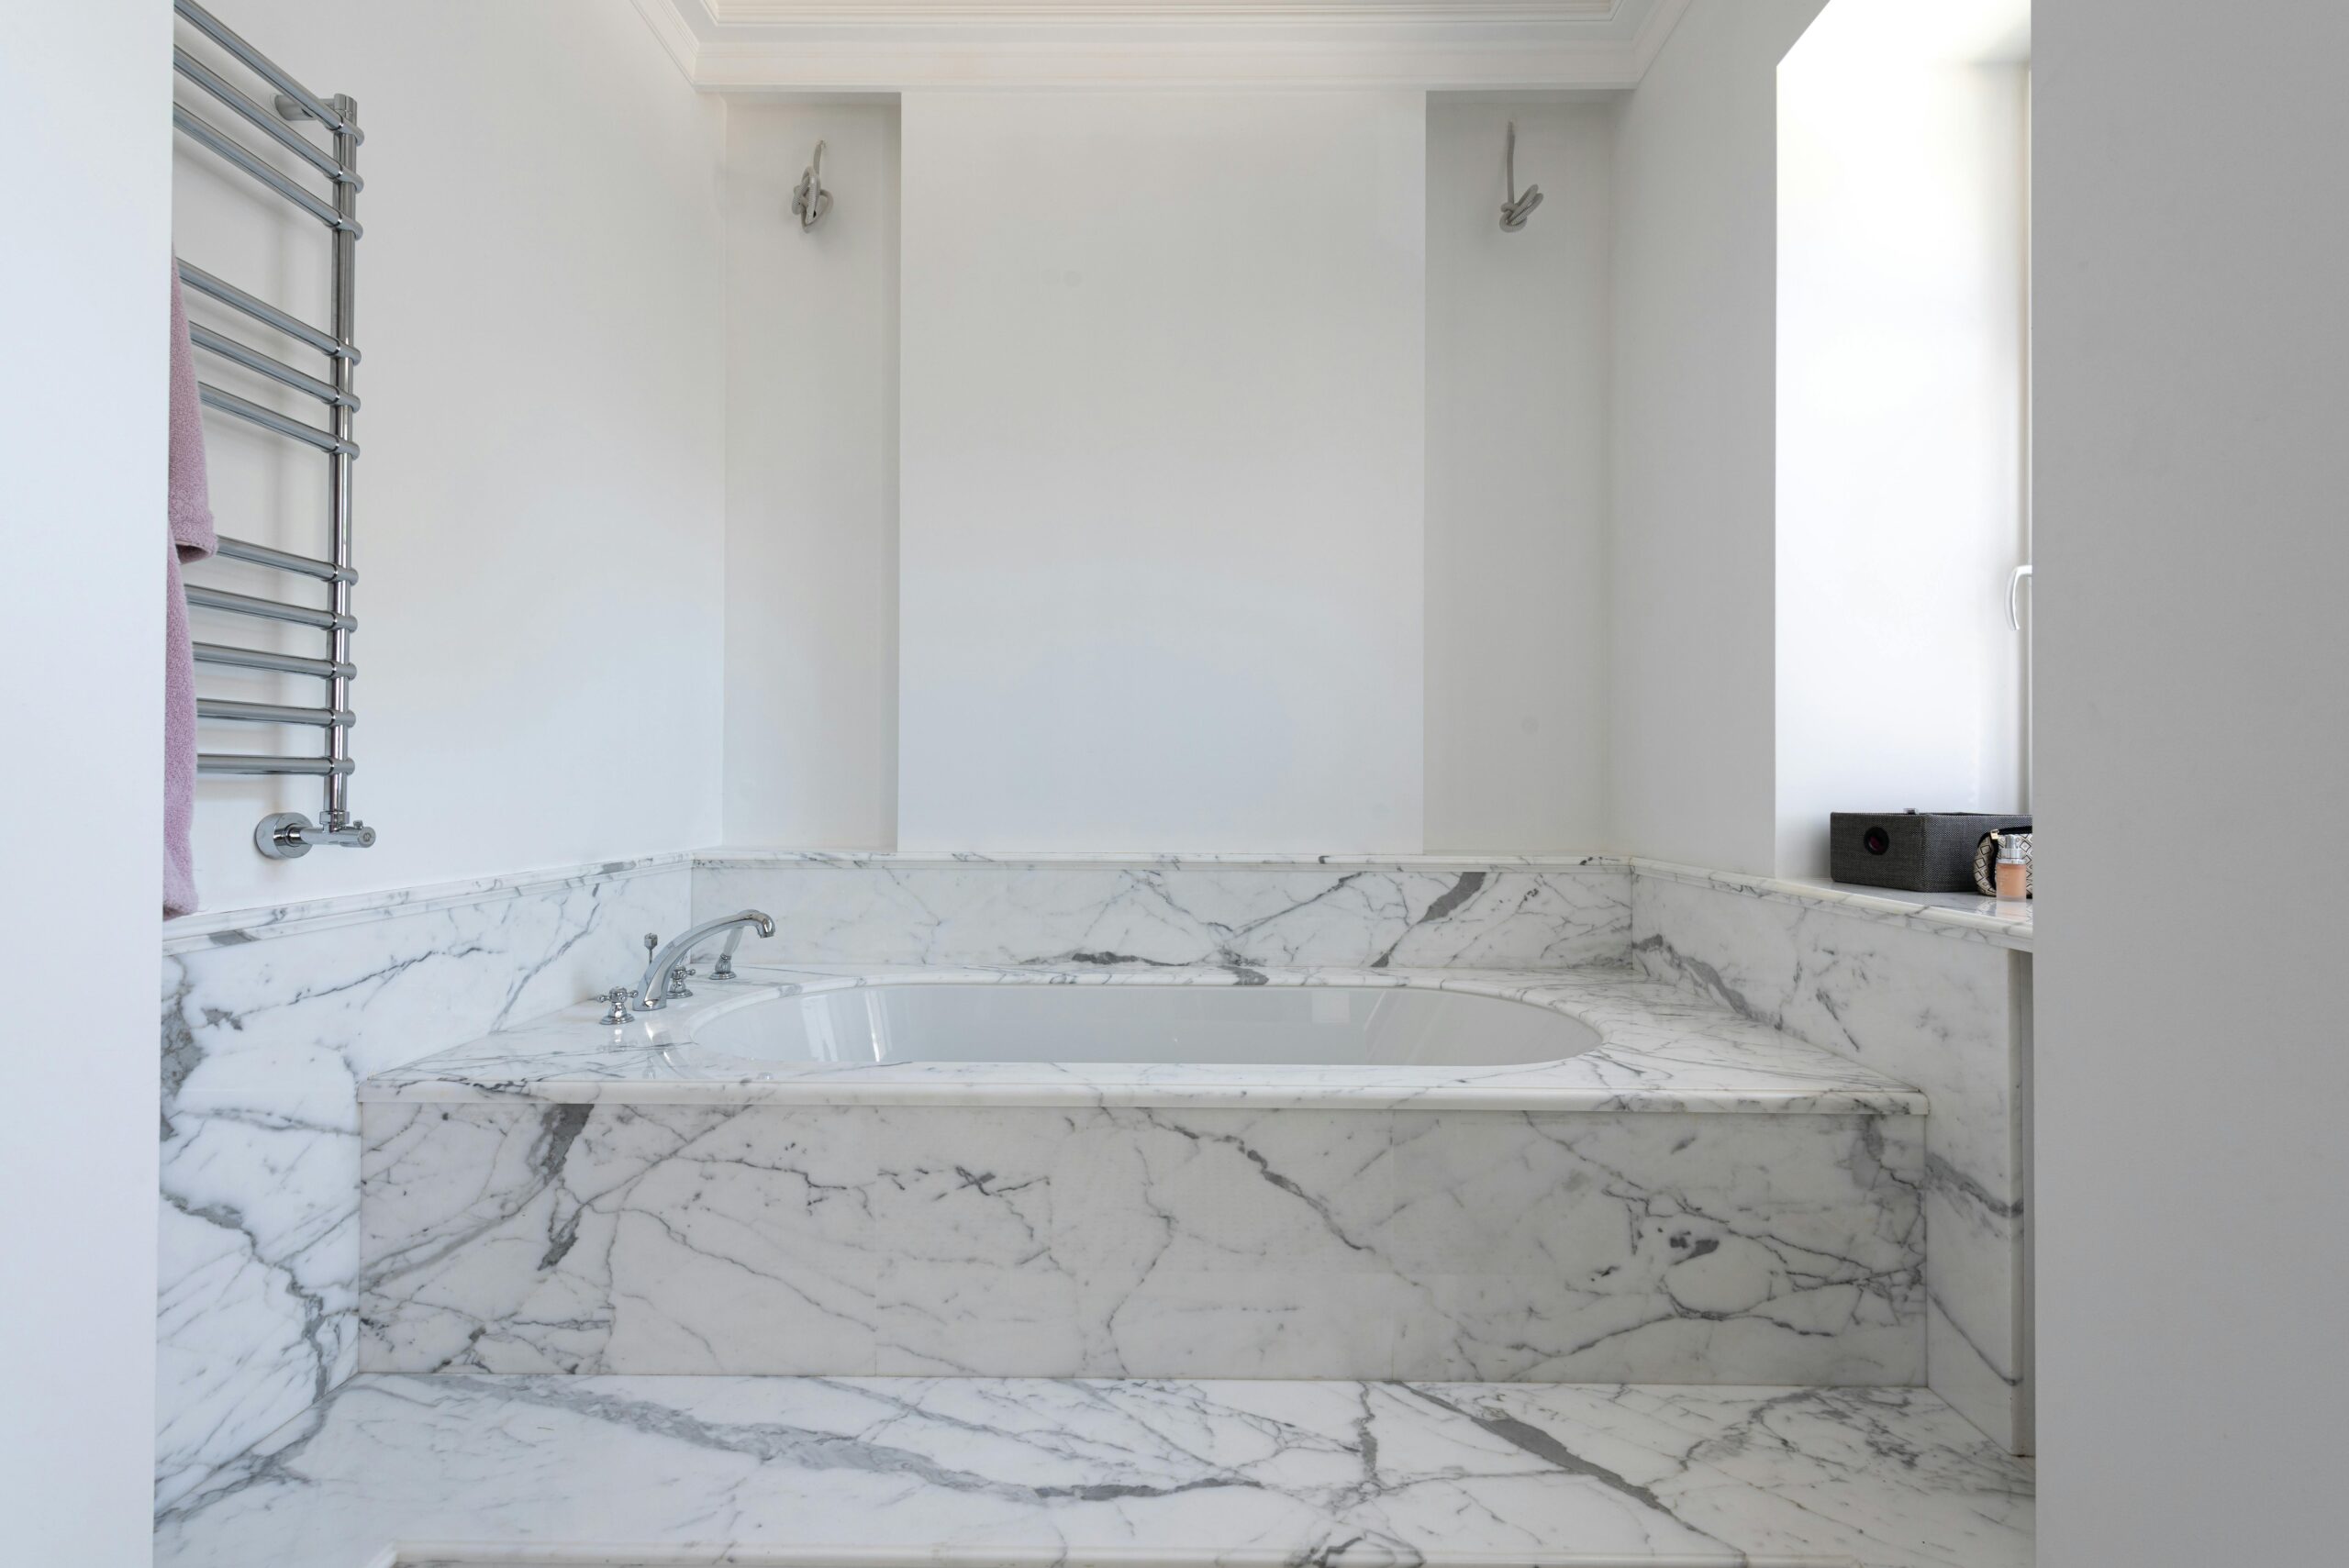 Here's how white Venetian plaster gives your home that glossy and marble luxe look. Pictured: White Venetian plaster in a bathroom